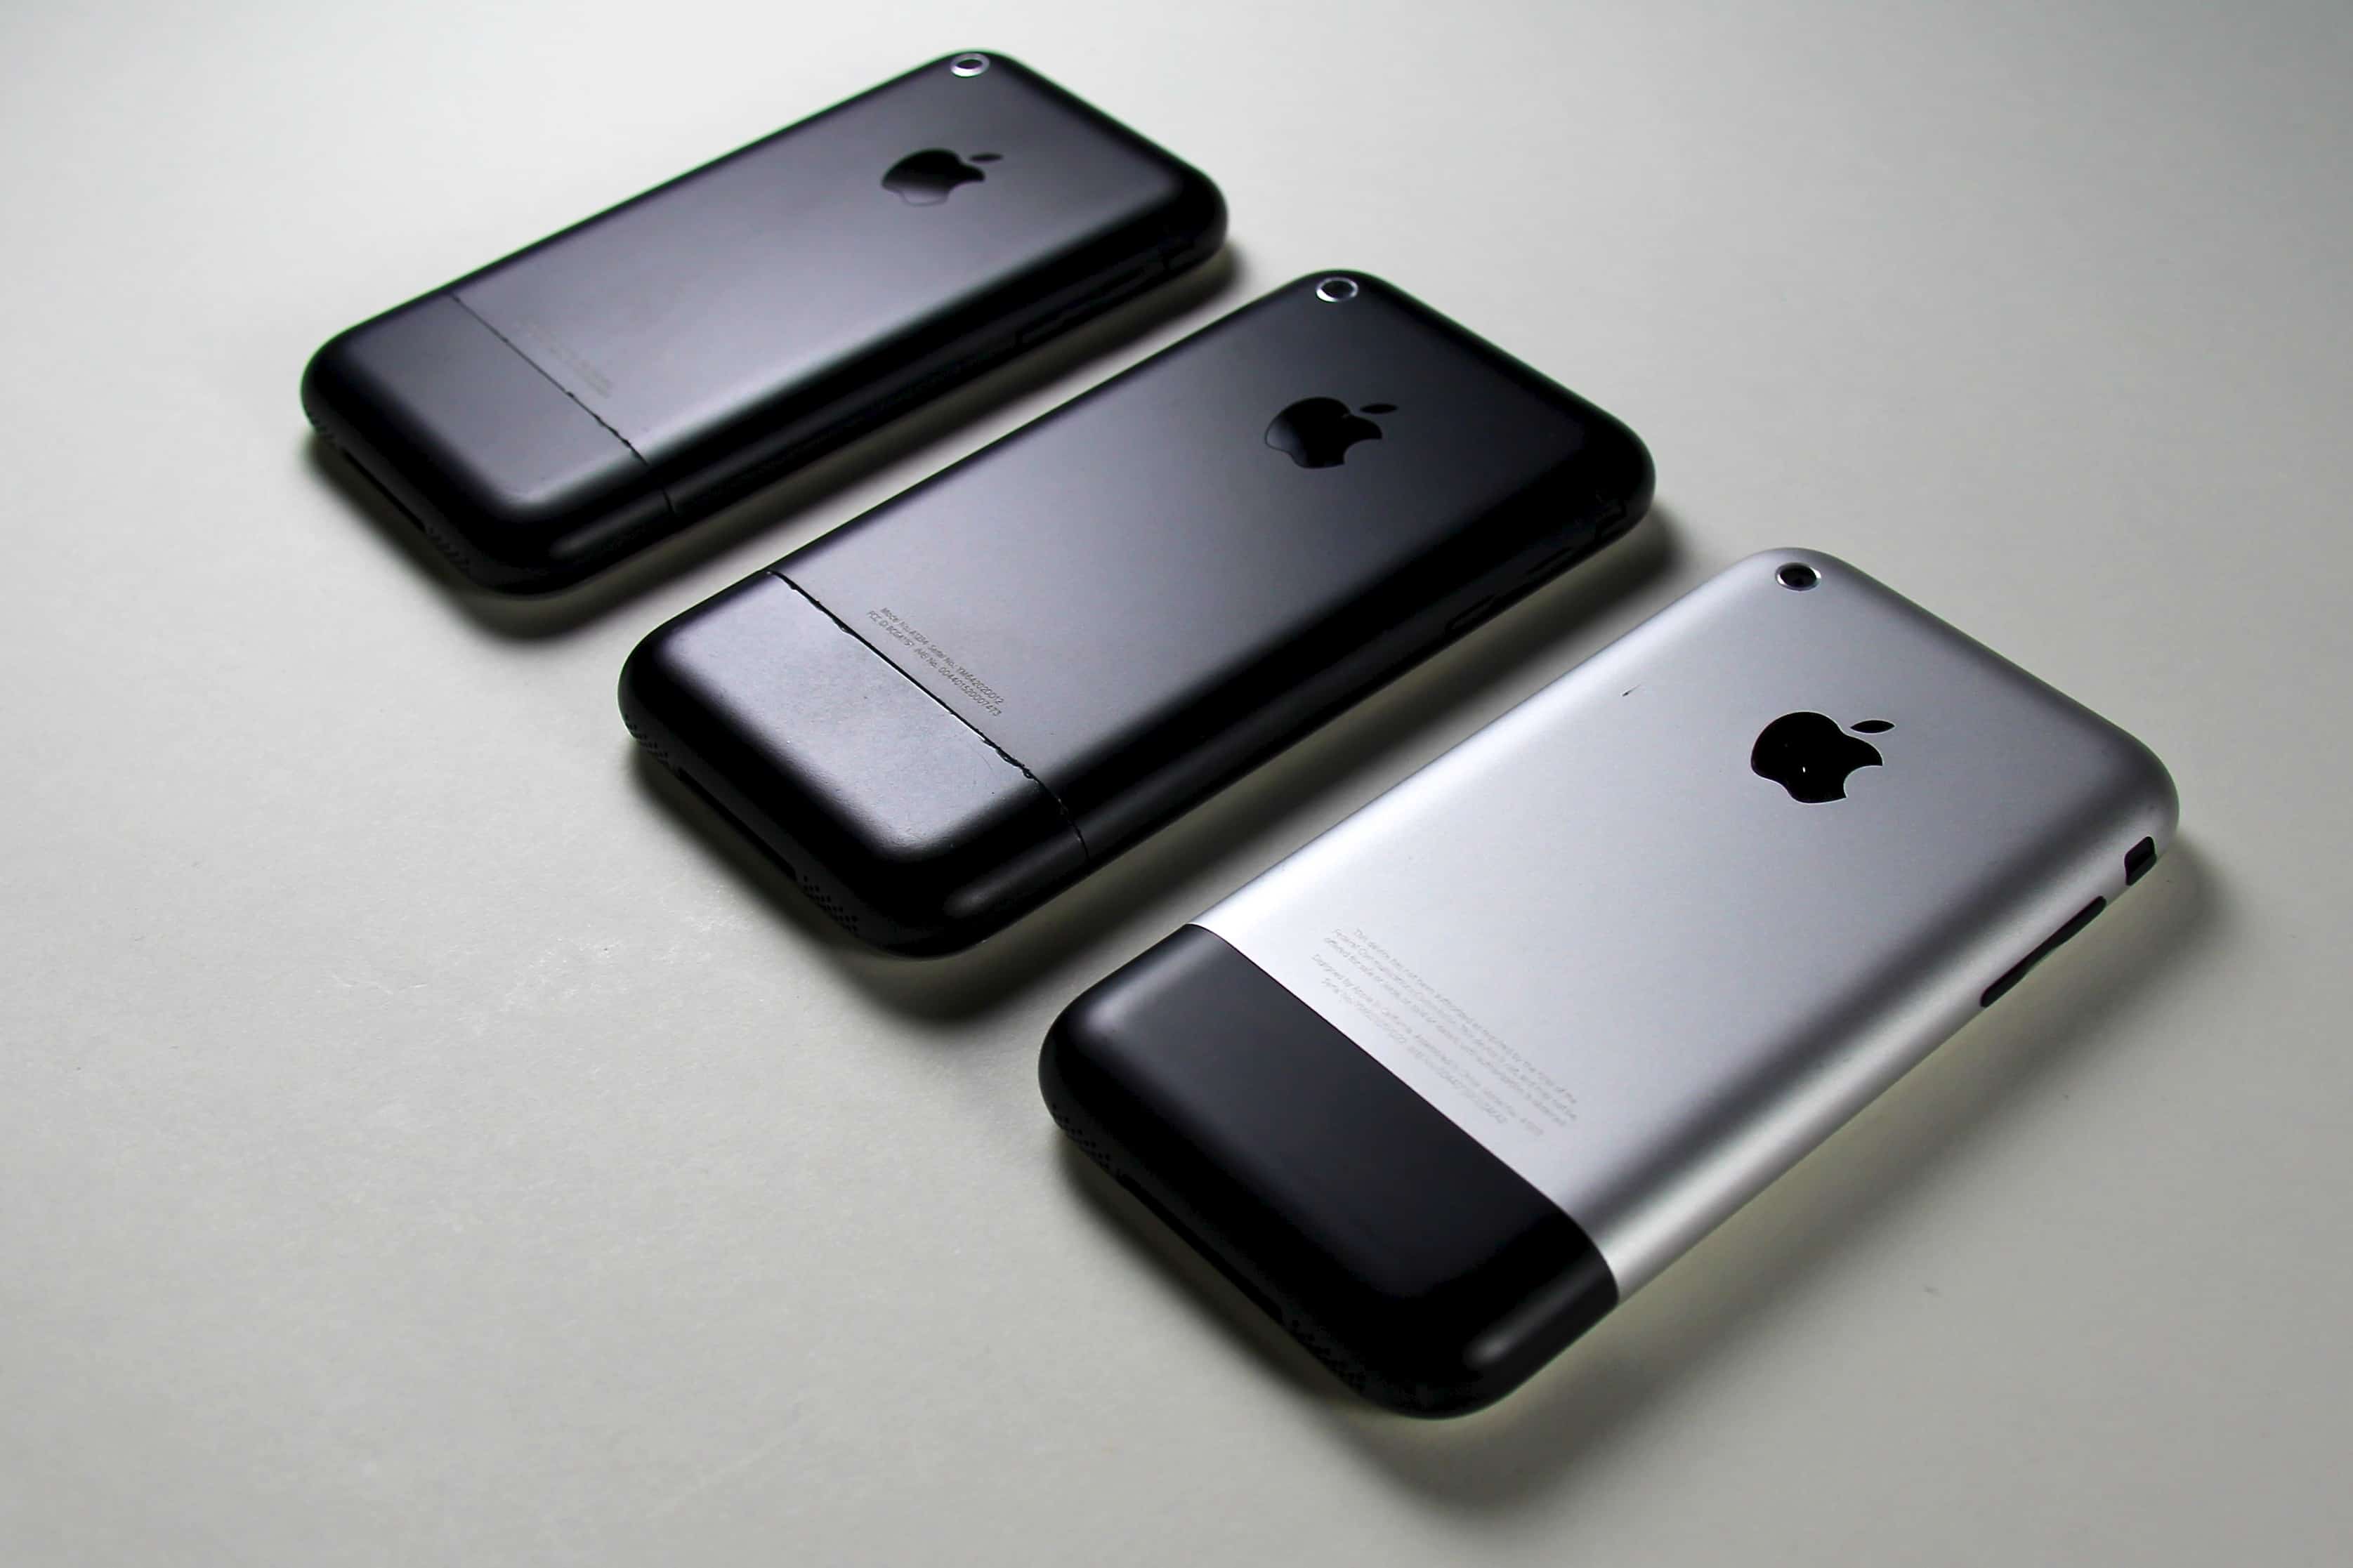 A trio of original iPhone prototypes show different colors and finishes tried out by Apple.